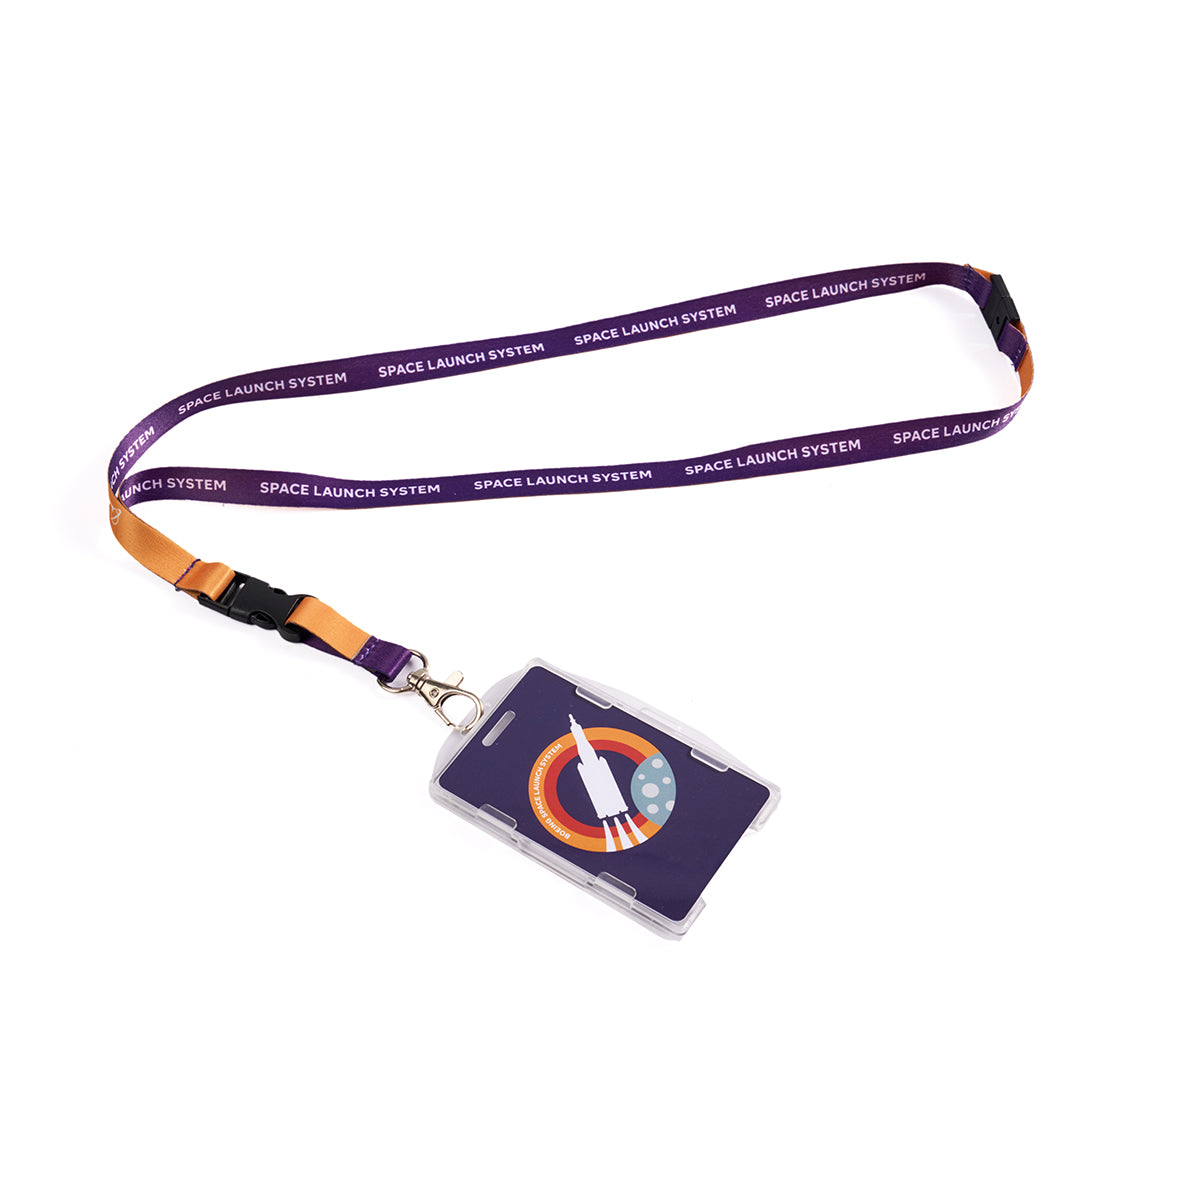 Full product image of the lanyard in purple and orange. Boeing Space Launch System Skyward sublimation print. Full printed PVC card with Boeing Space Launch System Skyward roundel design.